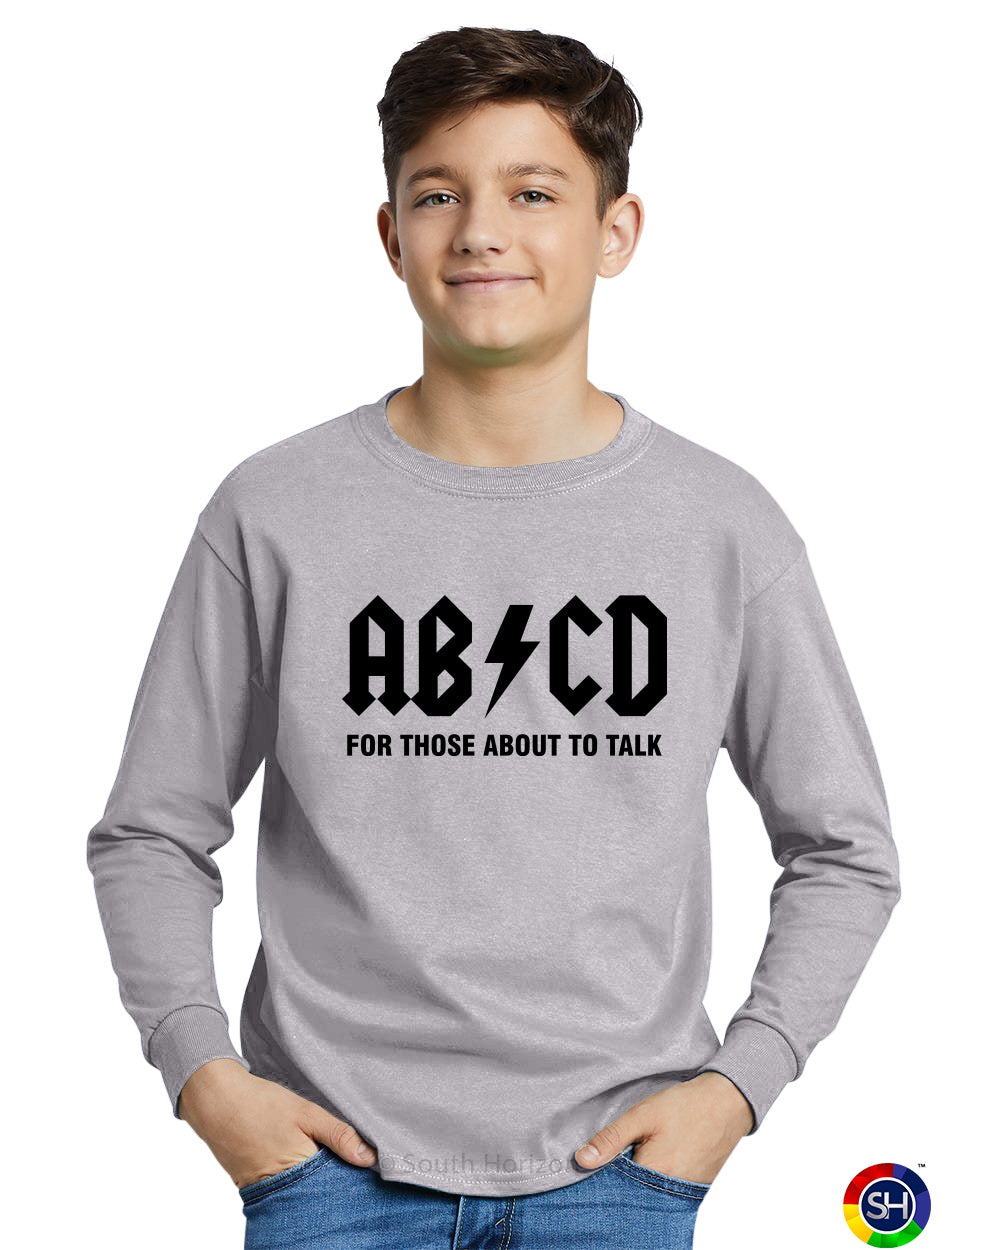 ABCD For Those About To Talk on Youth Long Sleeve Shirt (#1084-203)